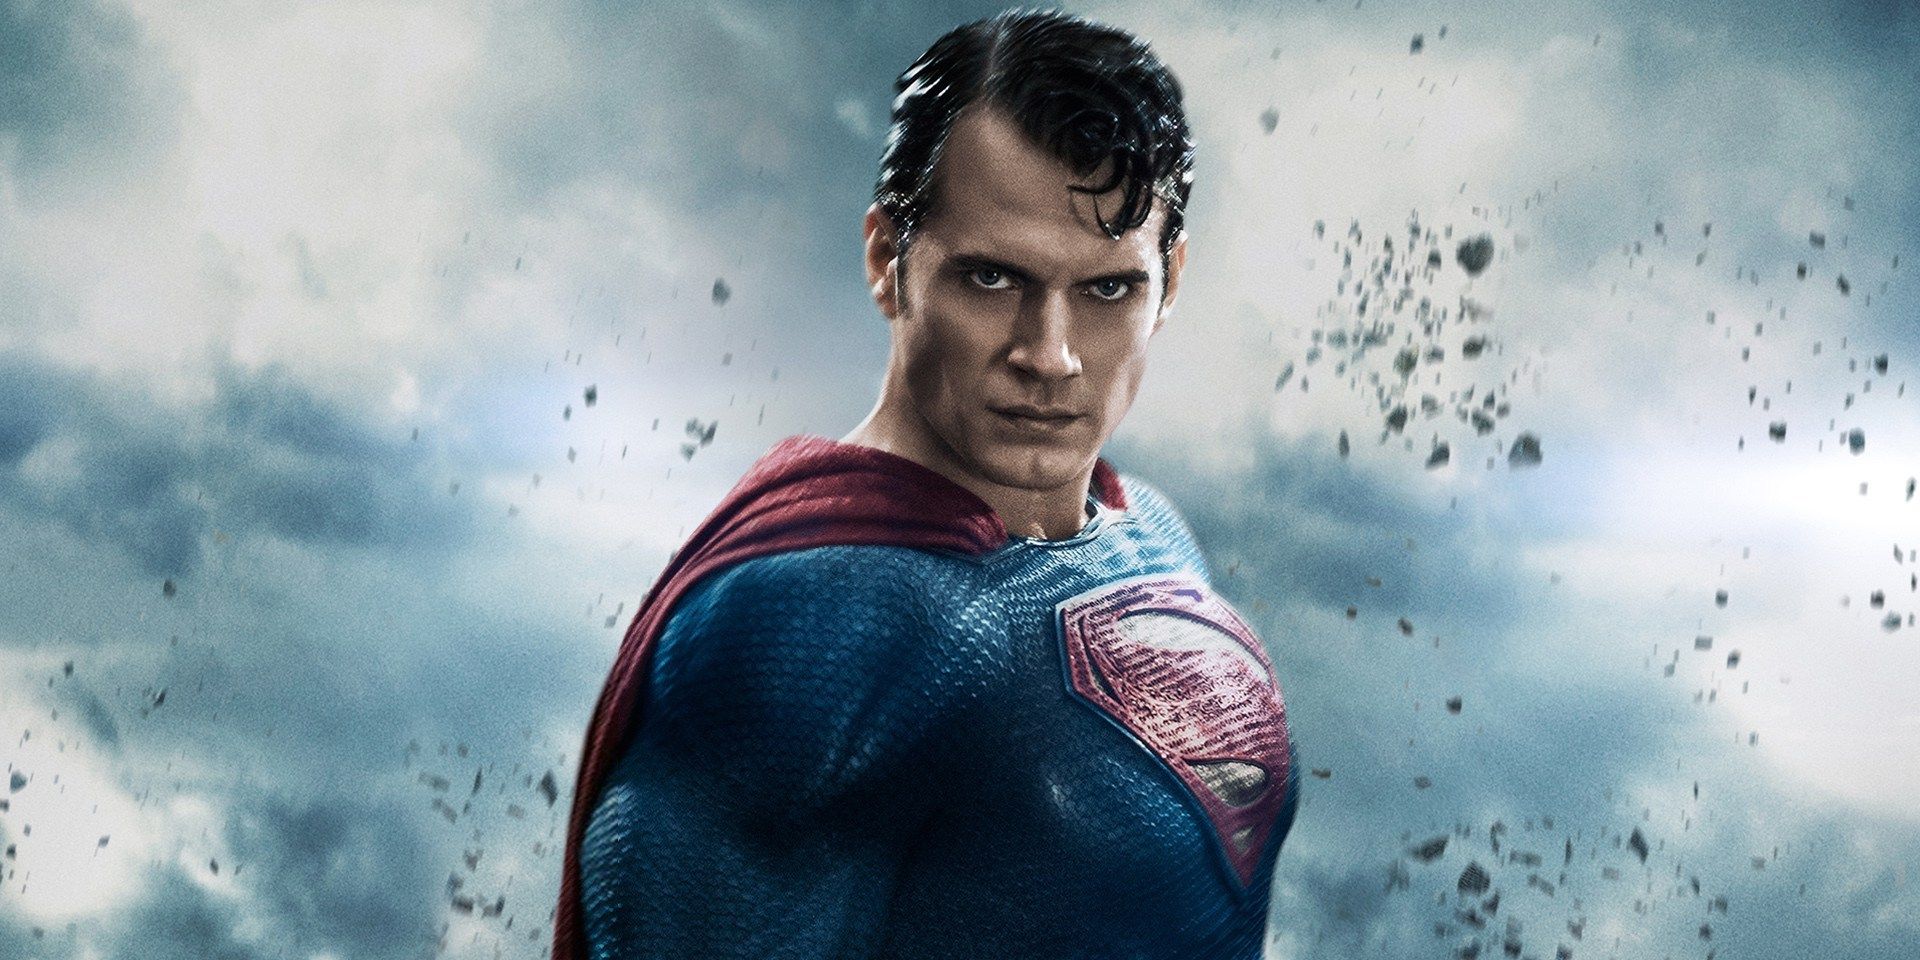 Henry's Superman looking seriously in Batman V Superman poster